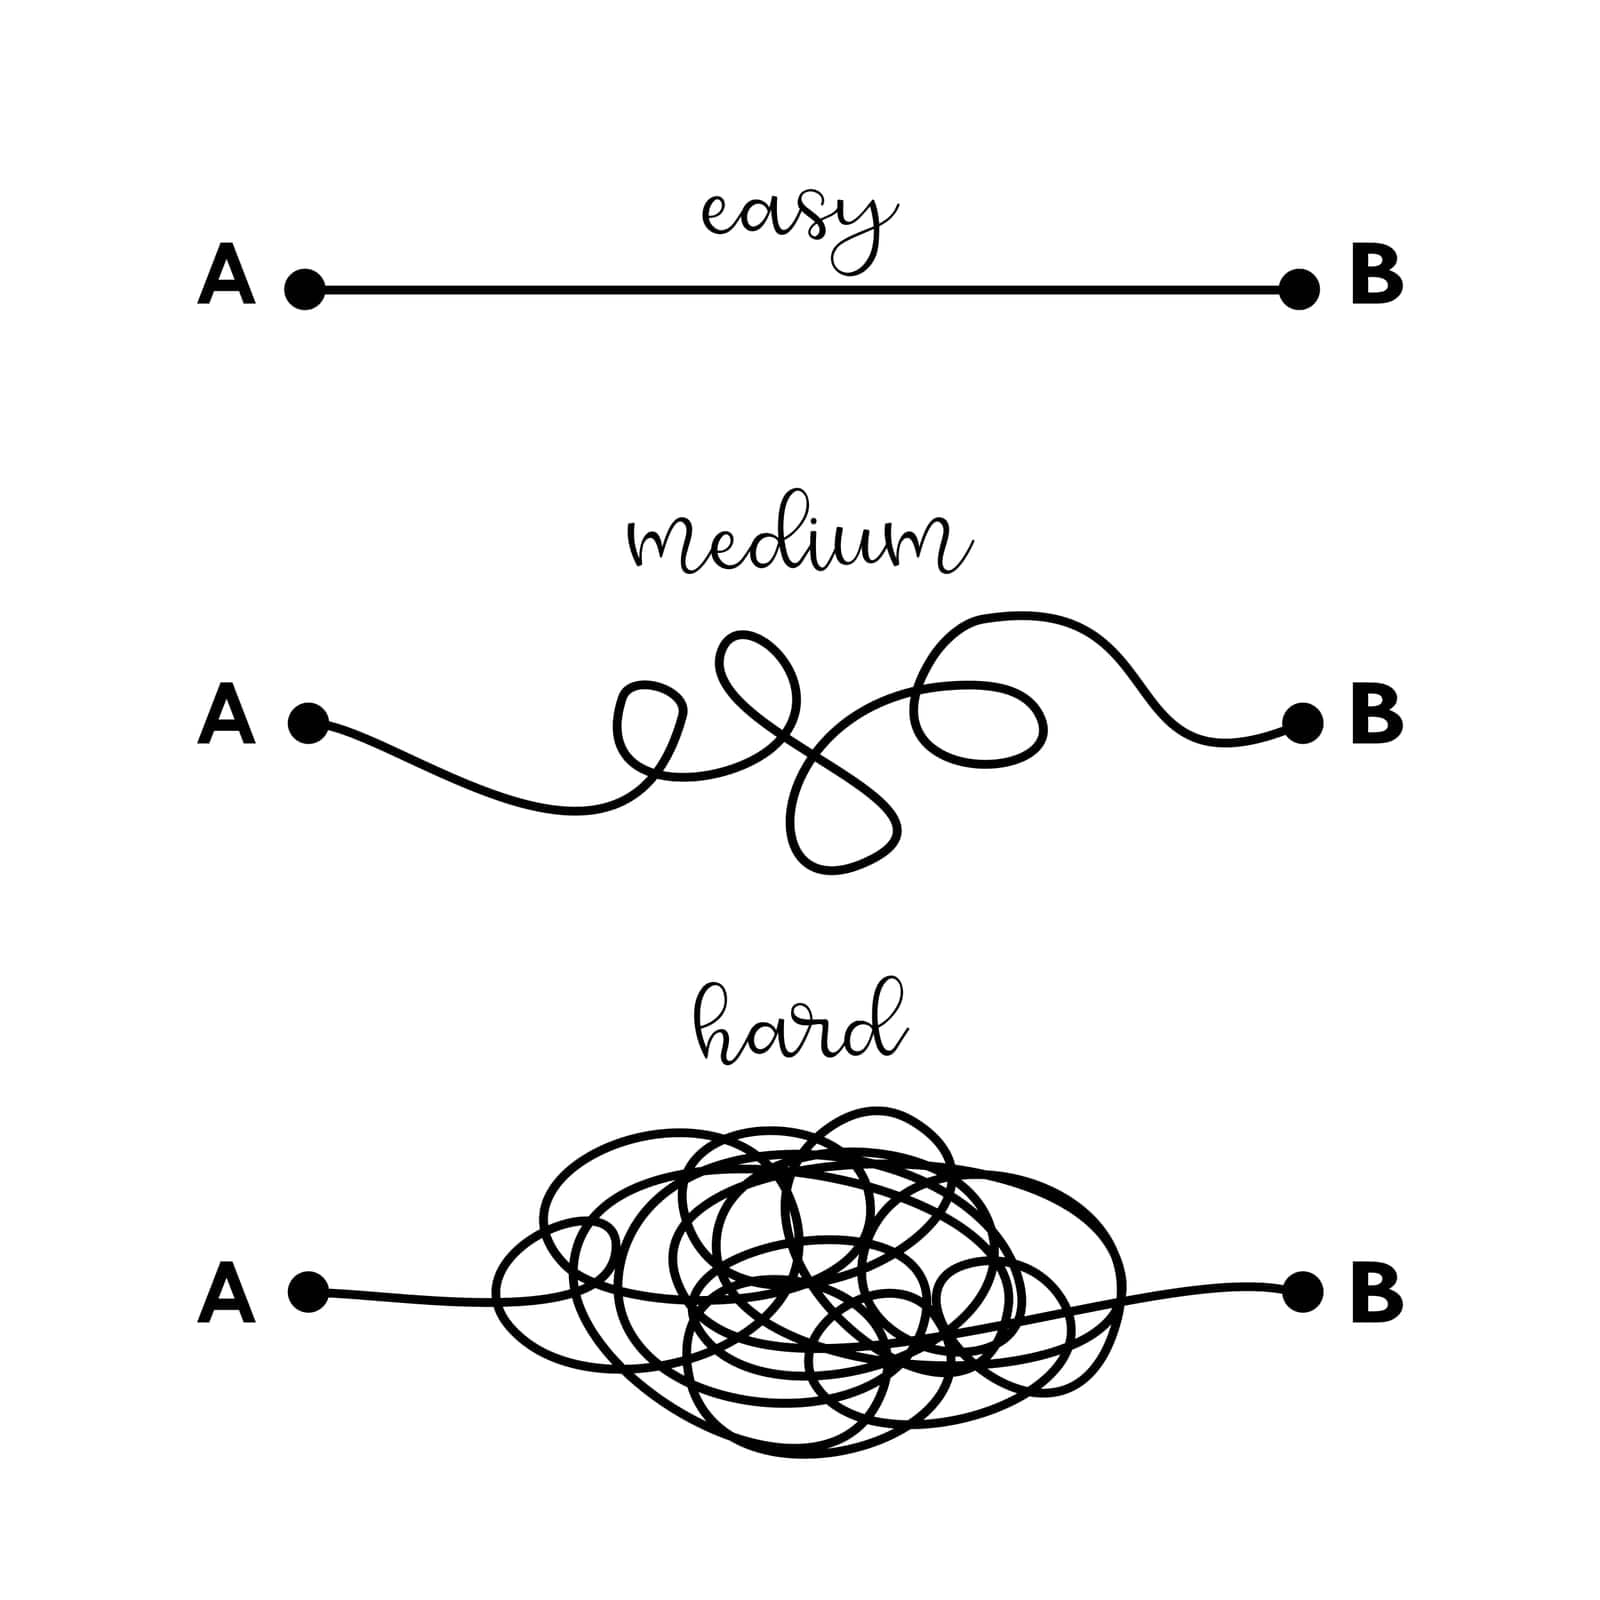 Hard, medium and easy way solution concept illustrated by tangled and straight lines. Complicated and simple path decision. Vector illustration design.